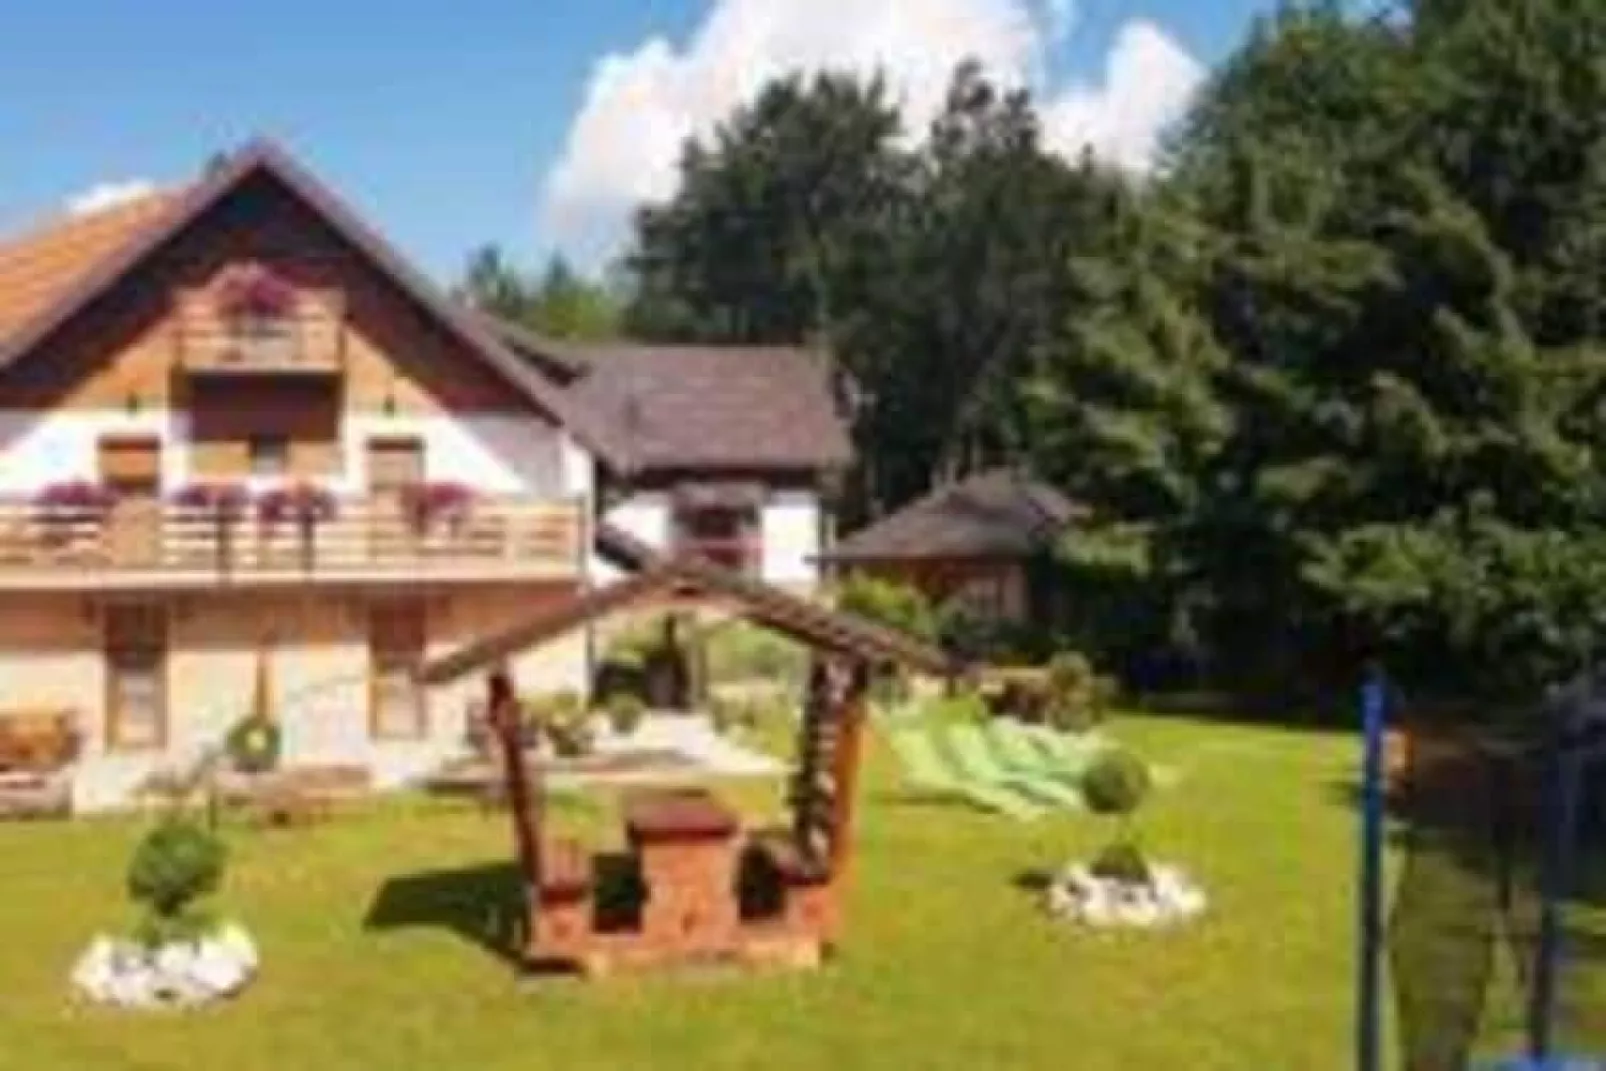 Green Valley Guesthouse double room 2 persons-Tuinen zomer